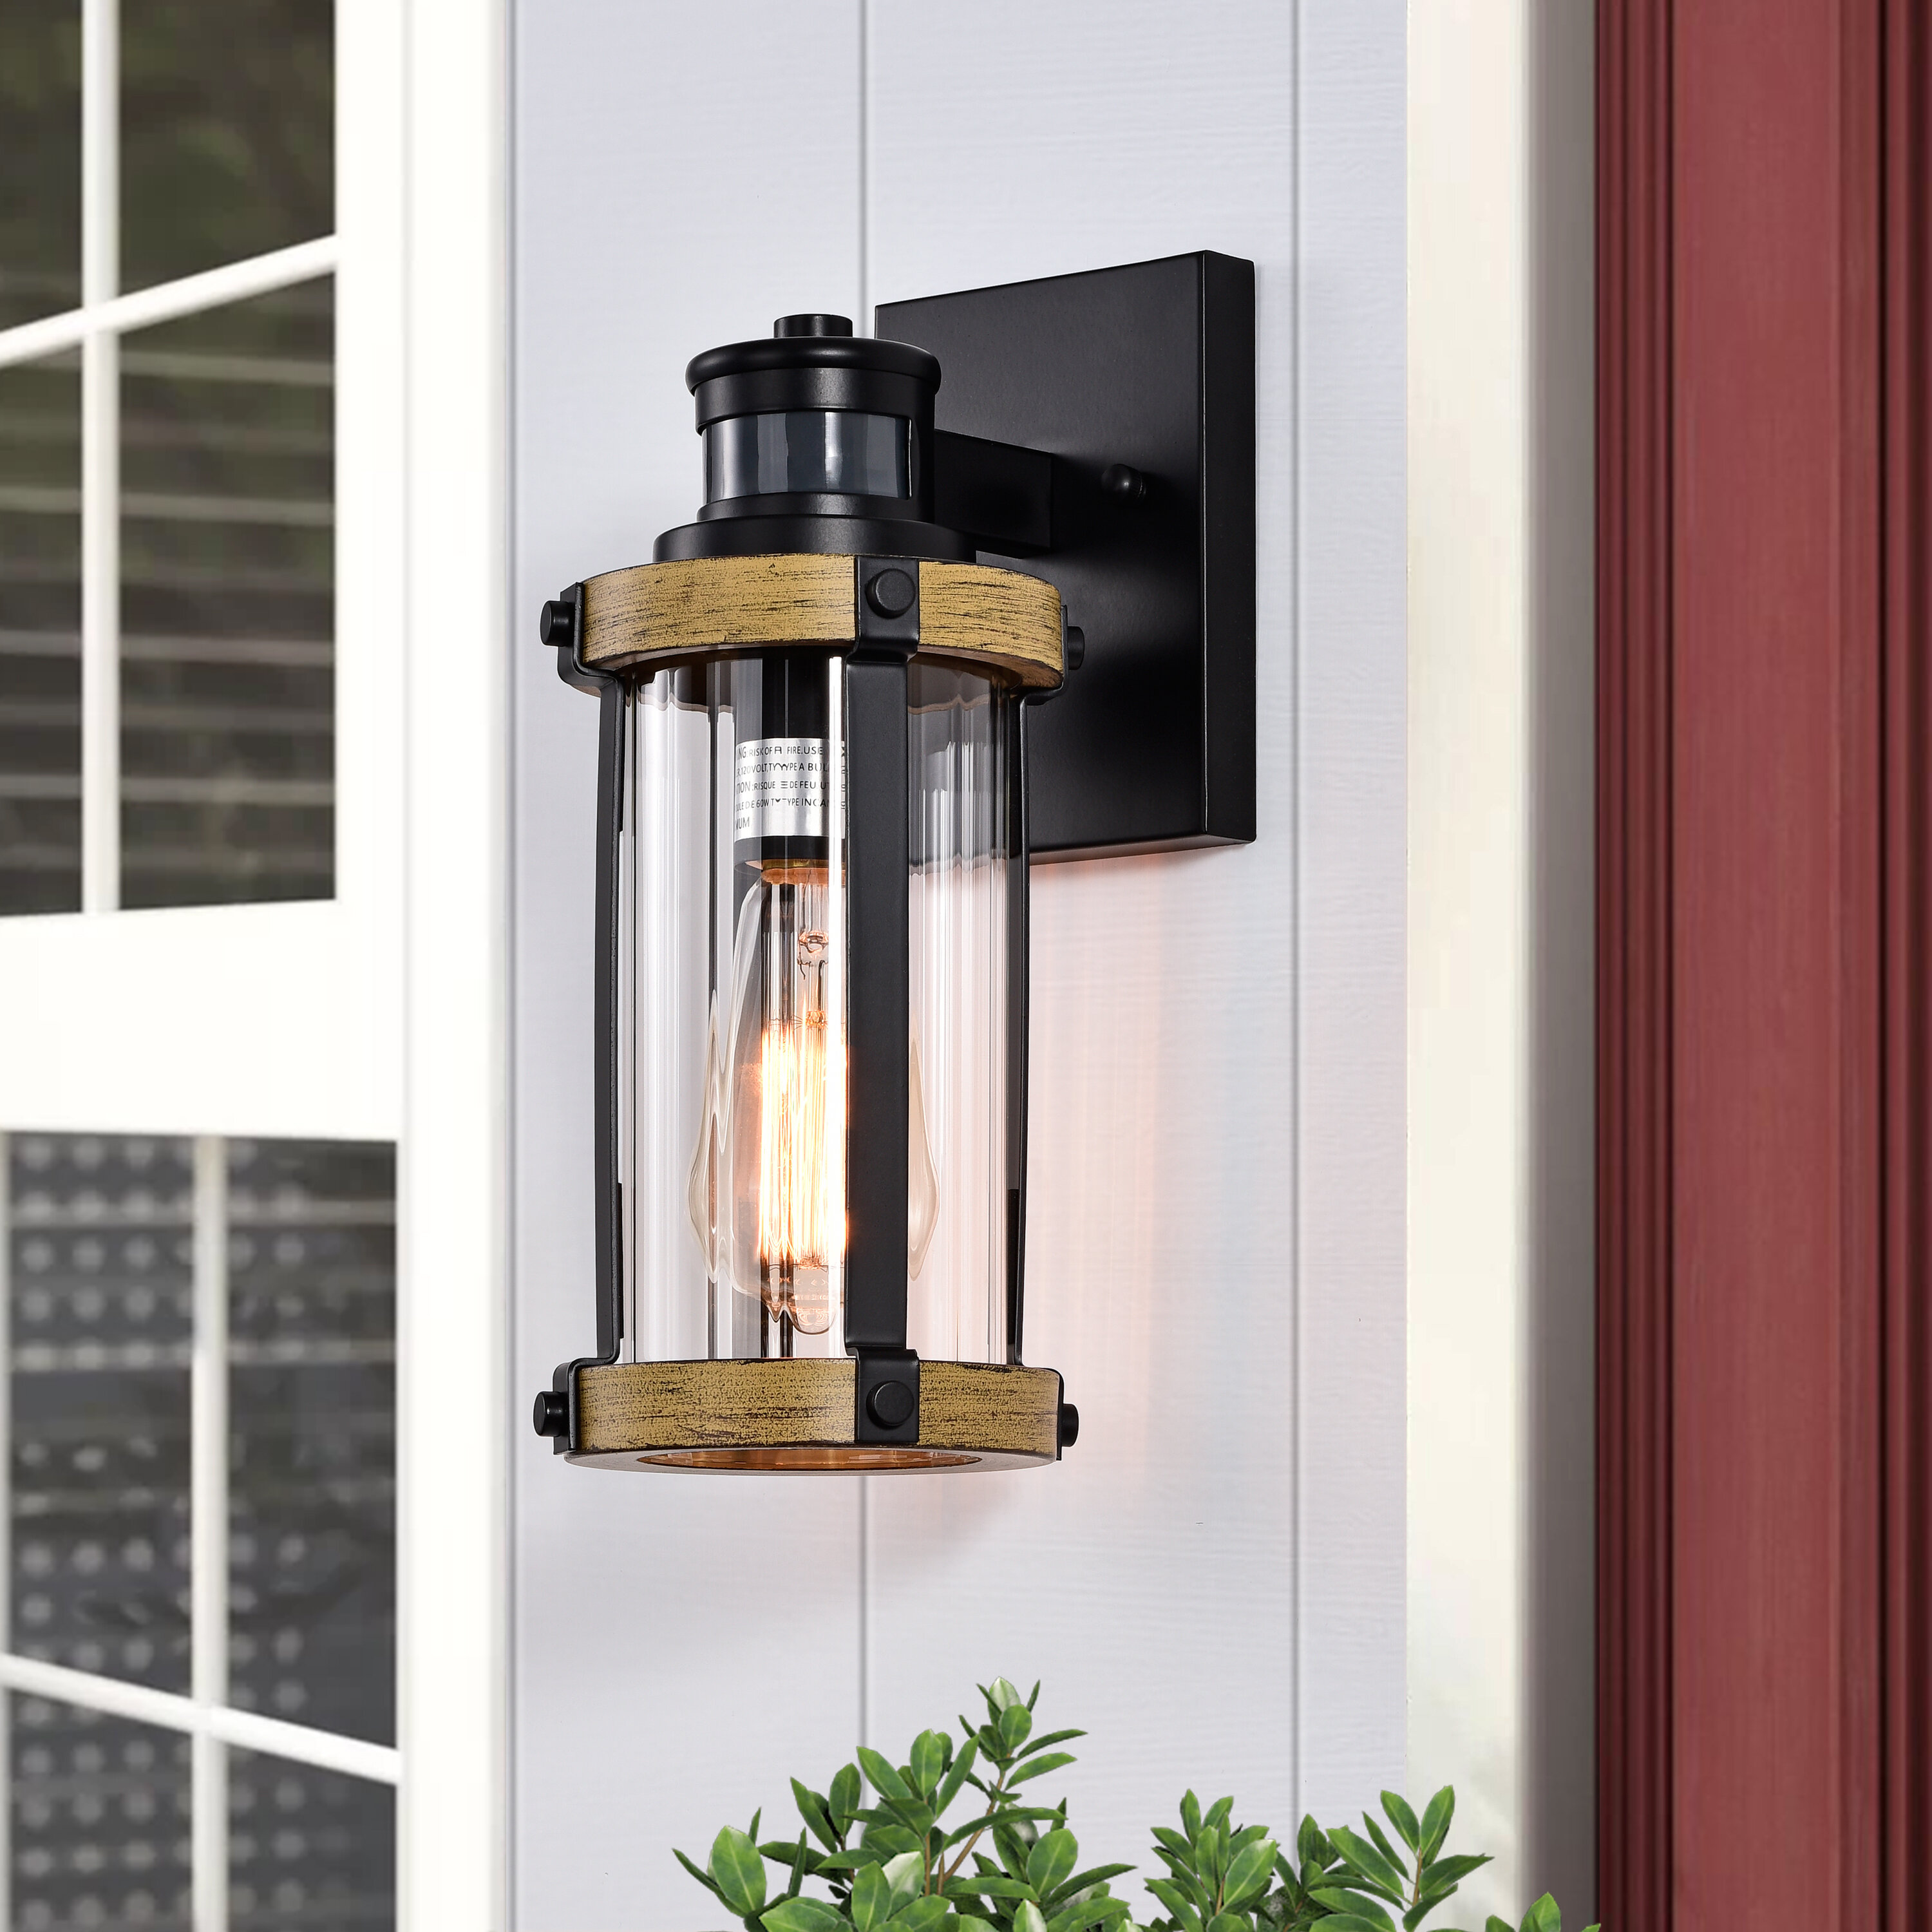 19 LED Outdoor Wall or Porch Lantern with Dusk to Dawn Sensor